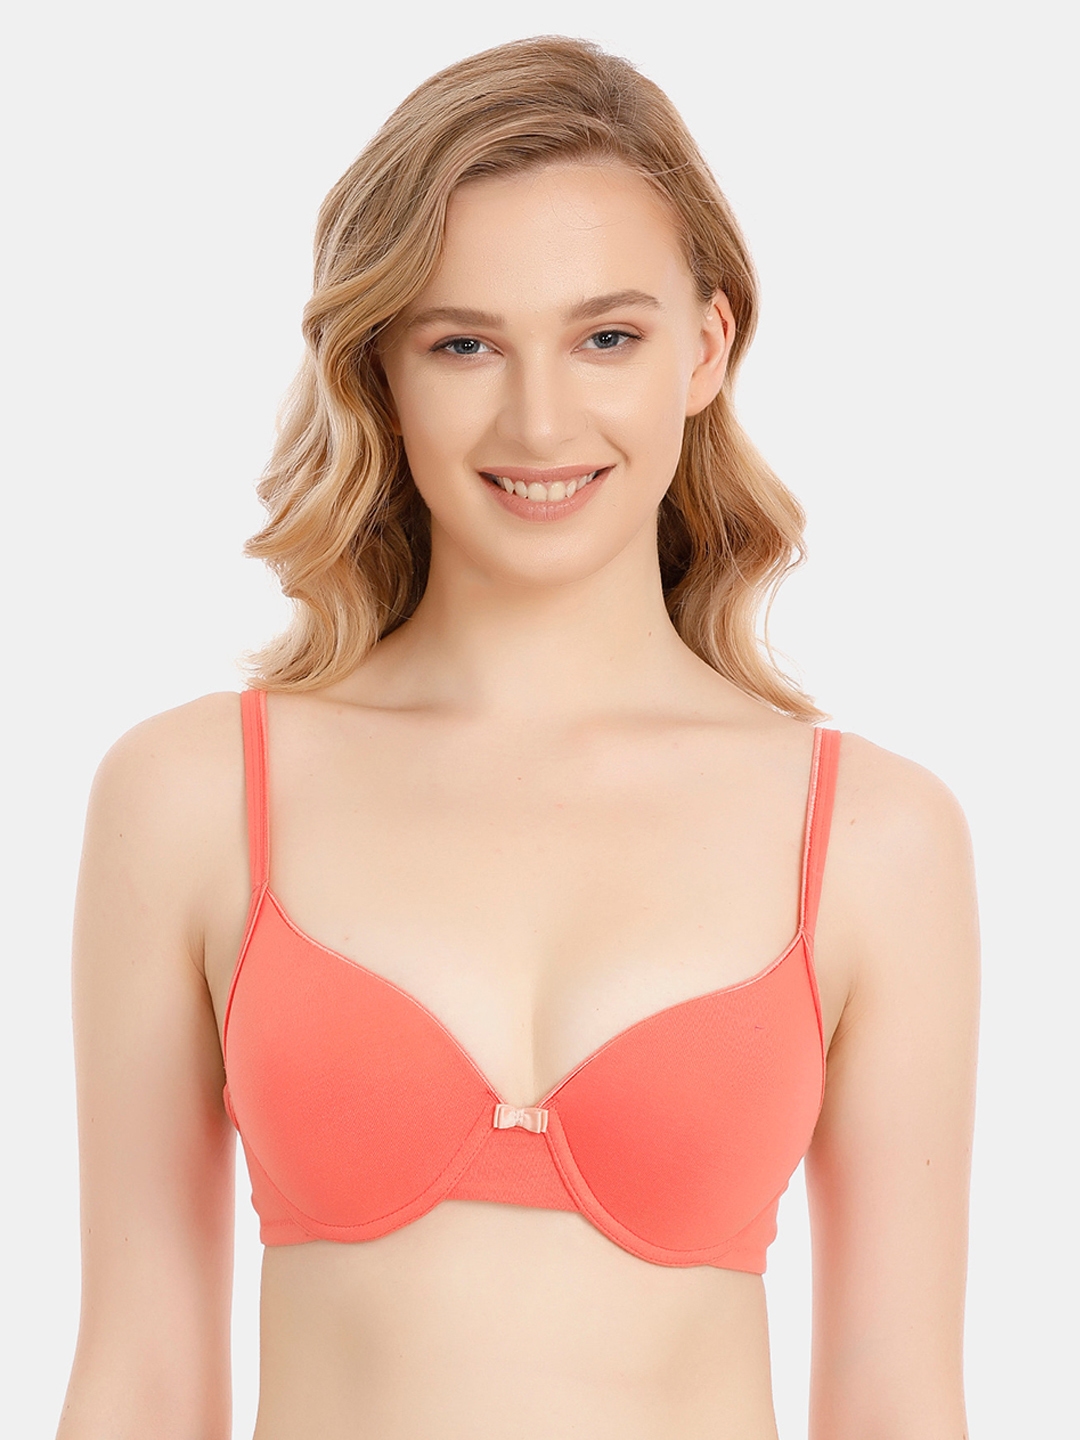 Zivame 38A Peach Support Bra in Chennai - Dealers, Manufacturers &  Suppliers - Justdial